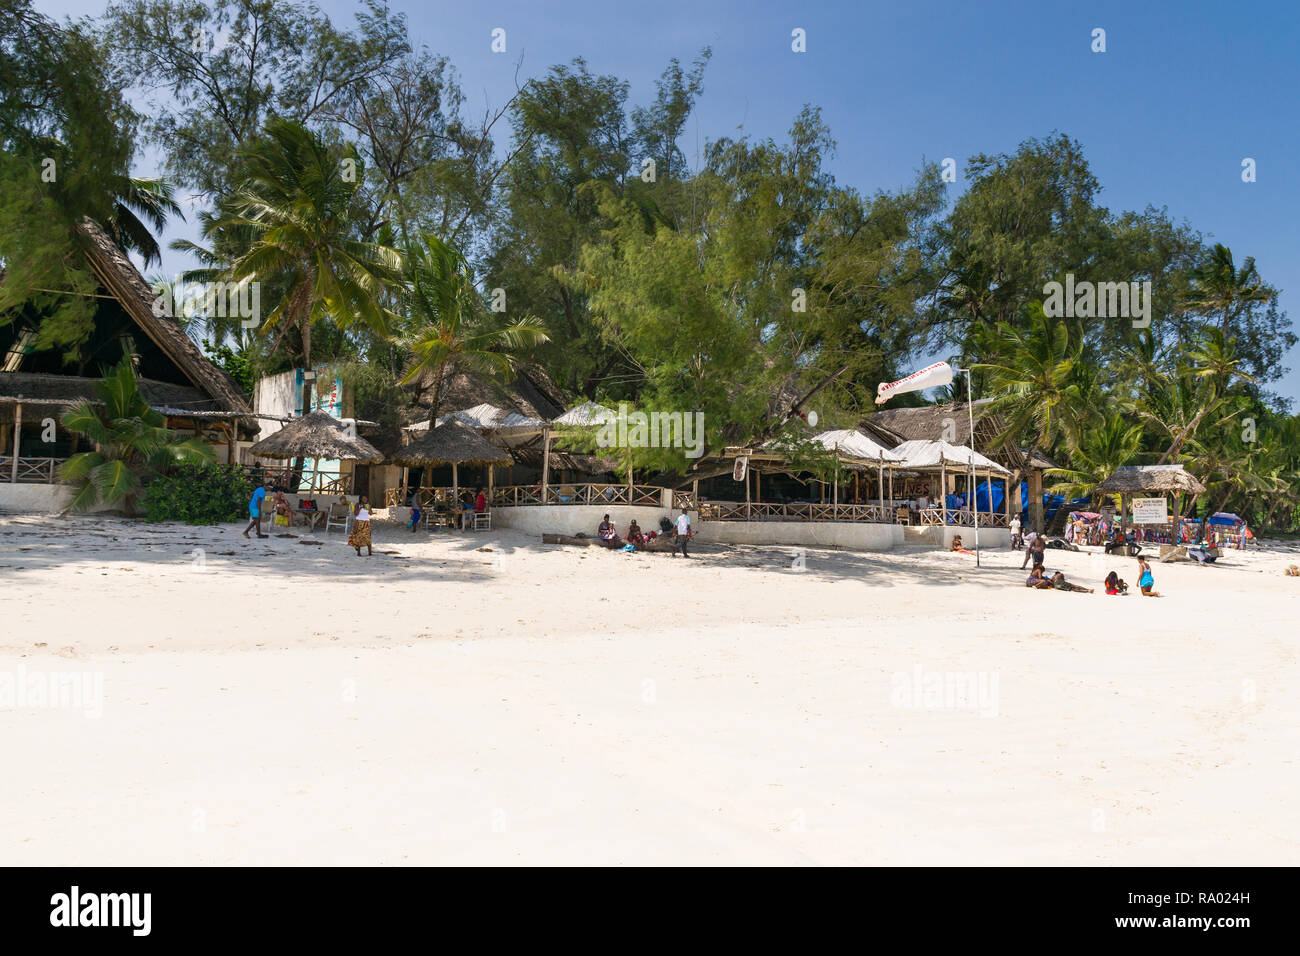 View of the exterior of Forty Thieves beach bar and restaurant with people outside on the beach on a sunny blue sky day, Diani, Kenya Stock Photo